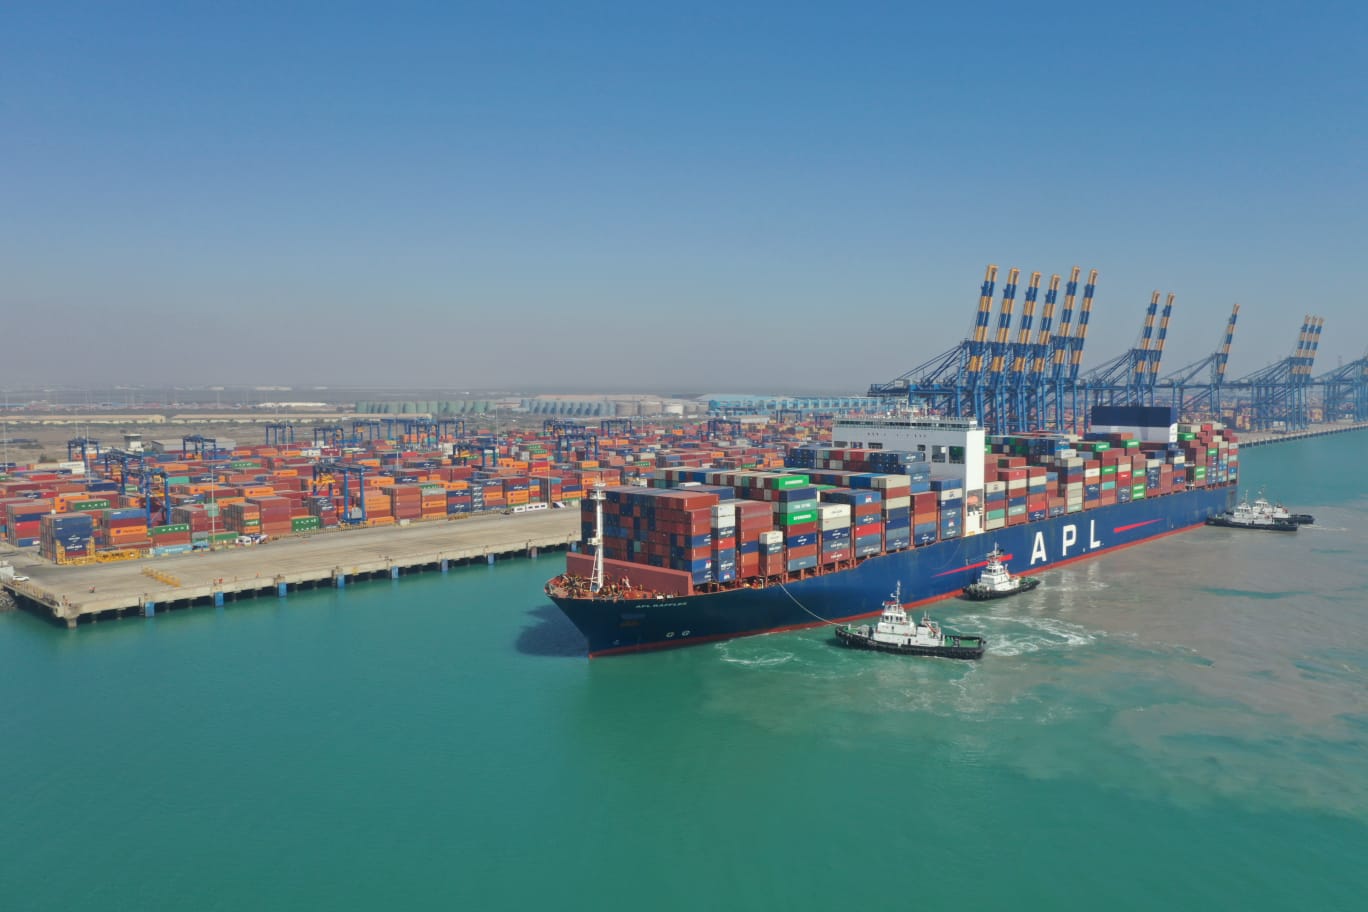 Adani’s Mundra Port handles the largest ever container vessel to call on India